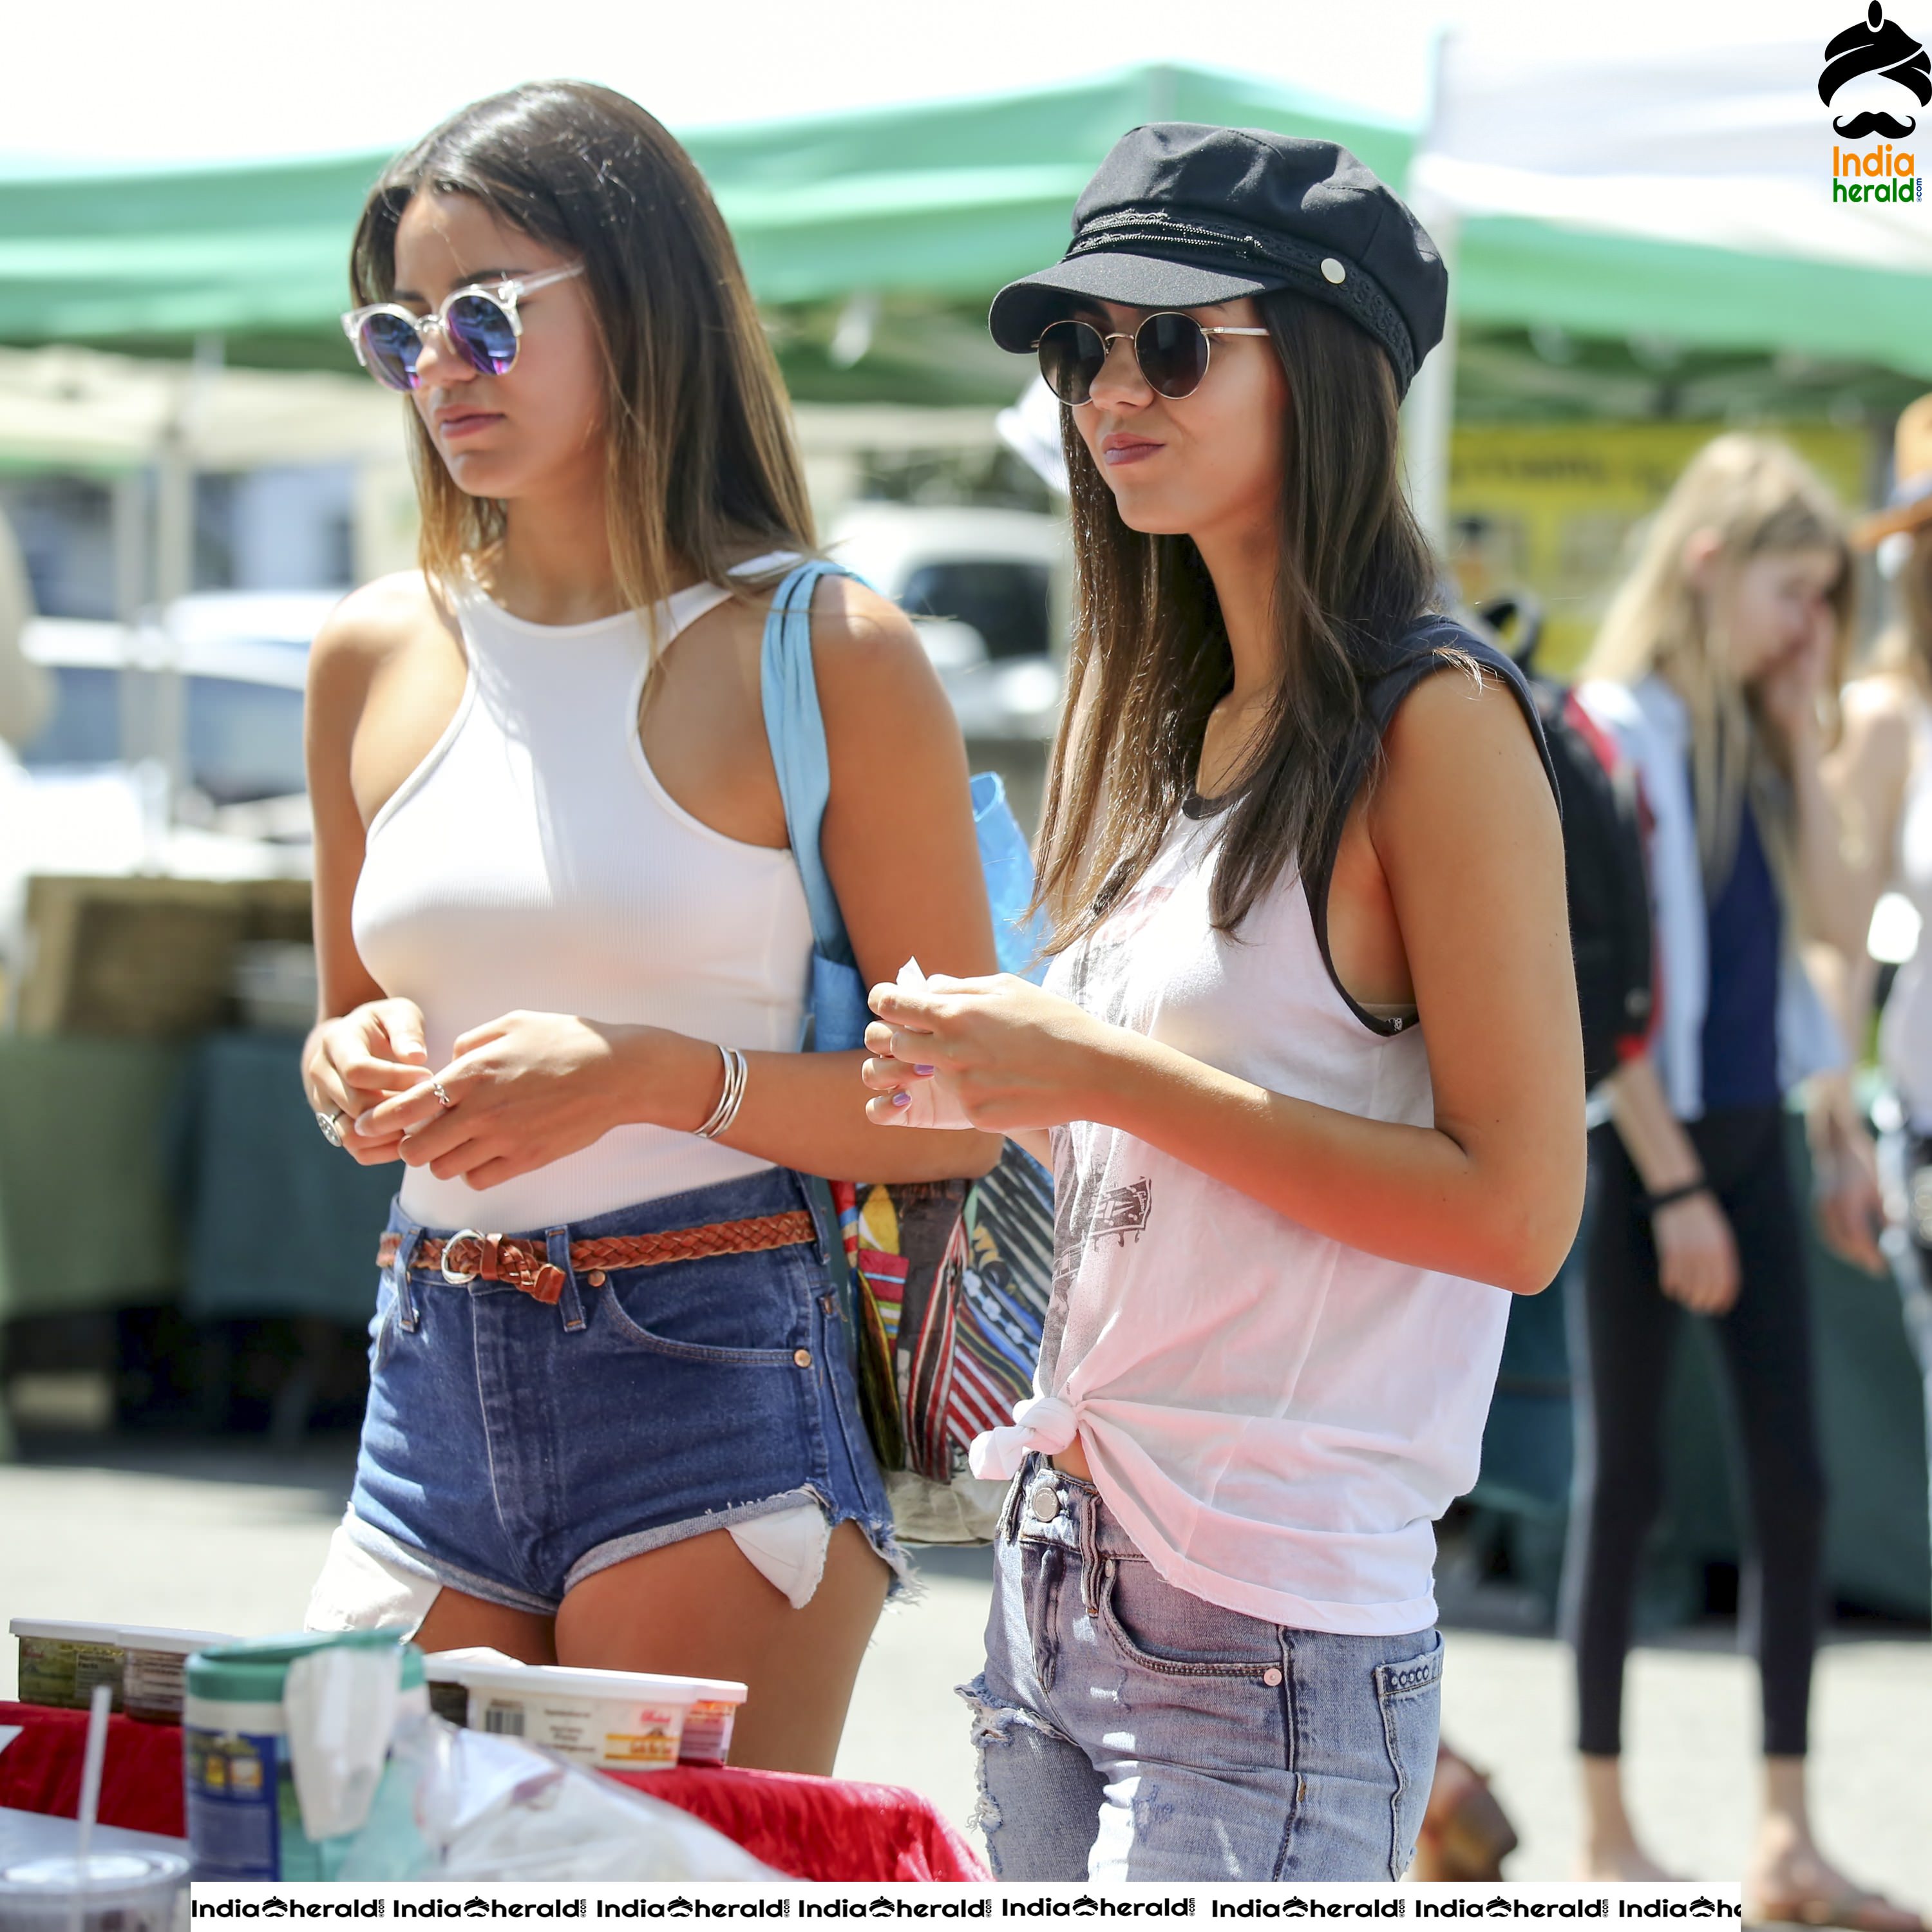 Victoria Justice at a Farmers Market with her Sister